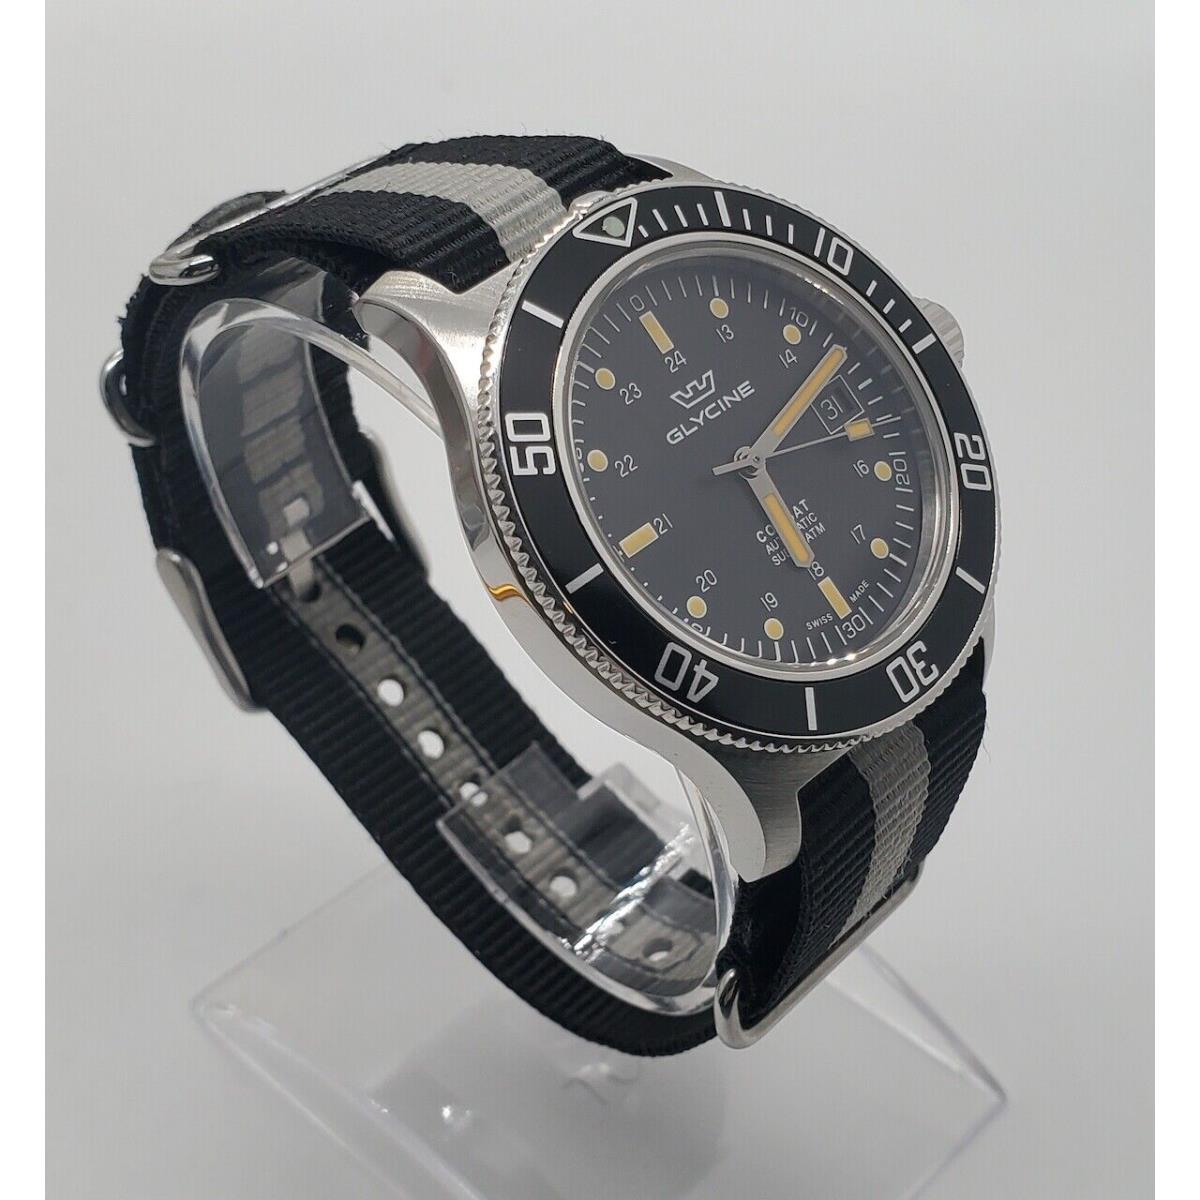 Glycine watch Combat SUB - Black Dial, Silver Band